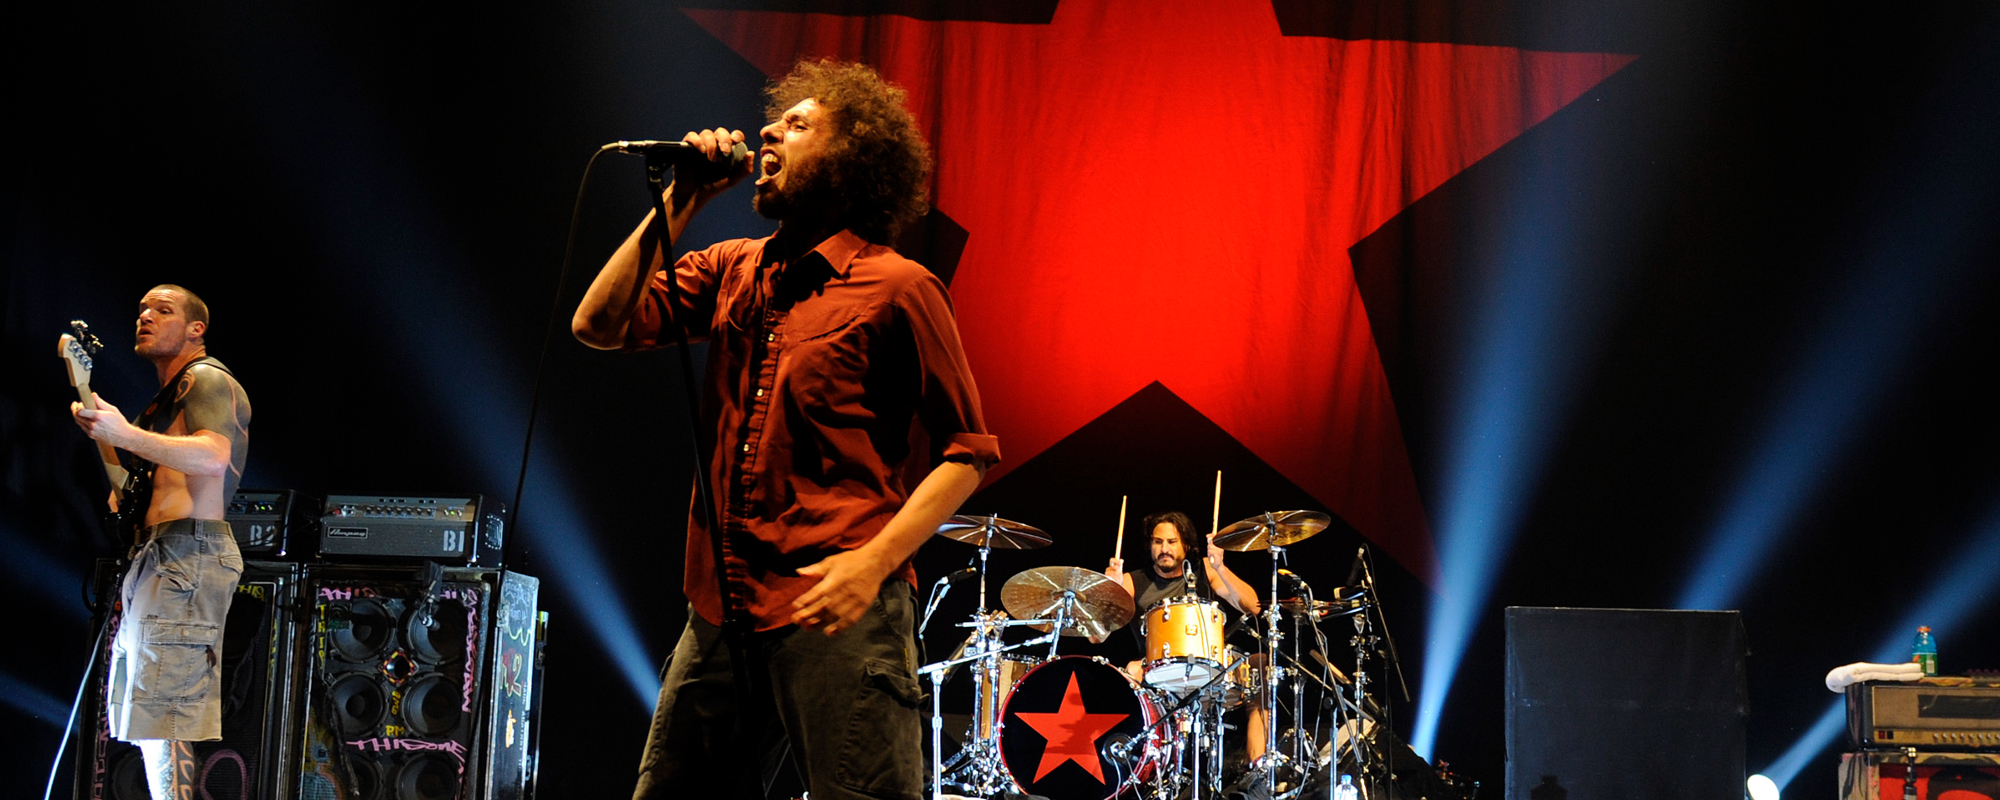 Rage Against the Machine Will Never Tour or Play Live Again, Brad Wilk Releases Apology